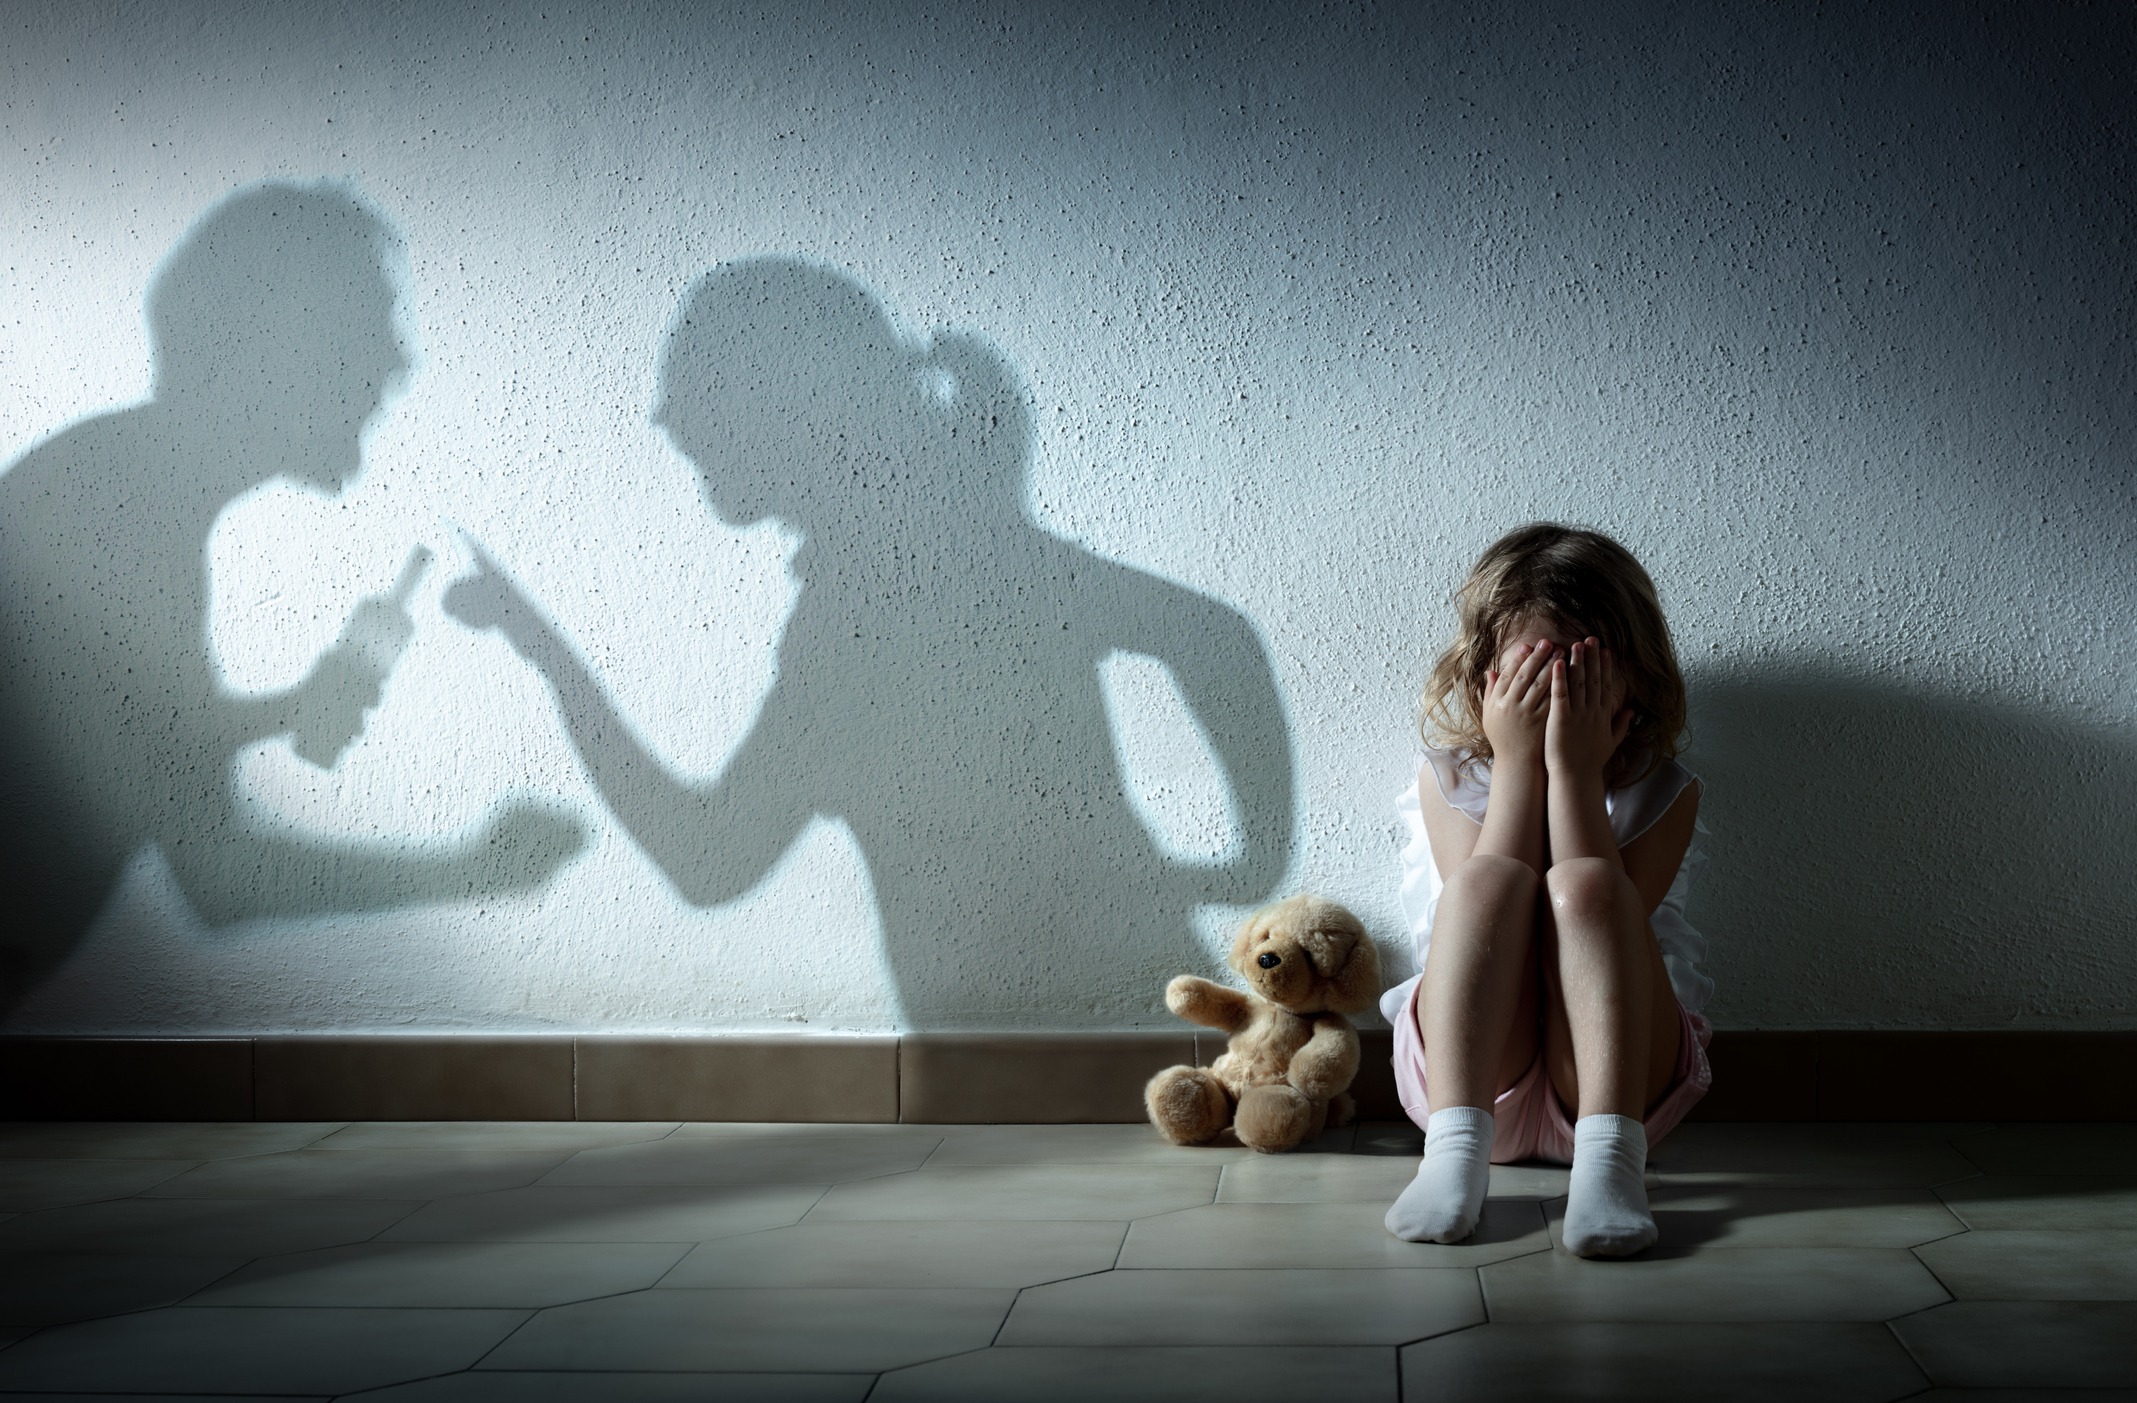 A young child sits against a wall with a teddy bear, covering their face. Shadows on the wall show two adults arguing and pointing fingers at each other